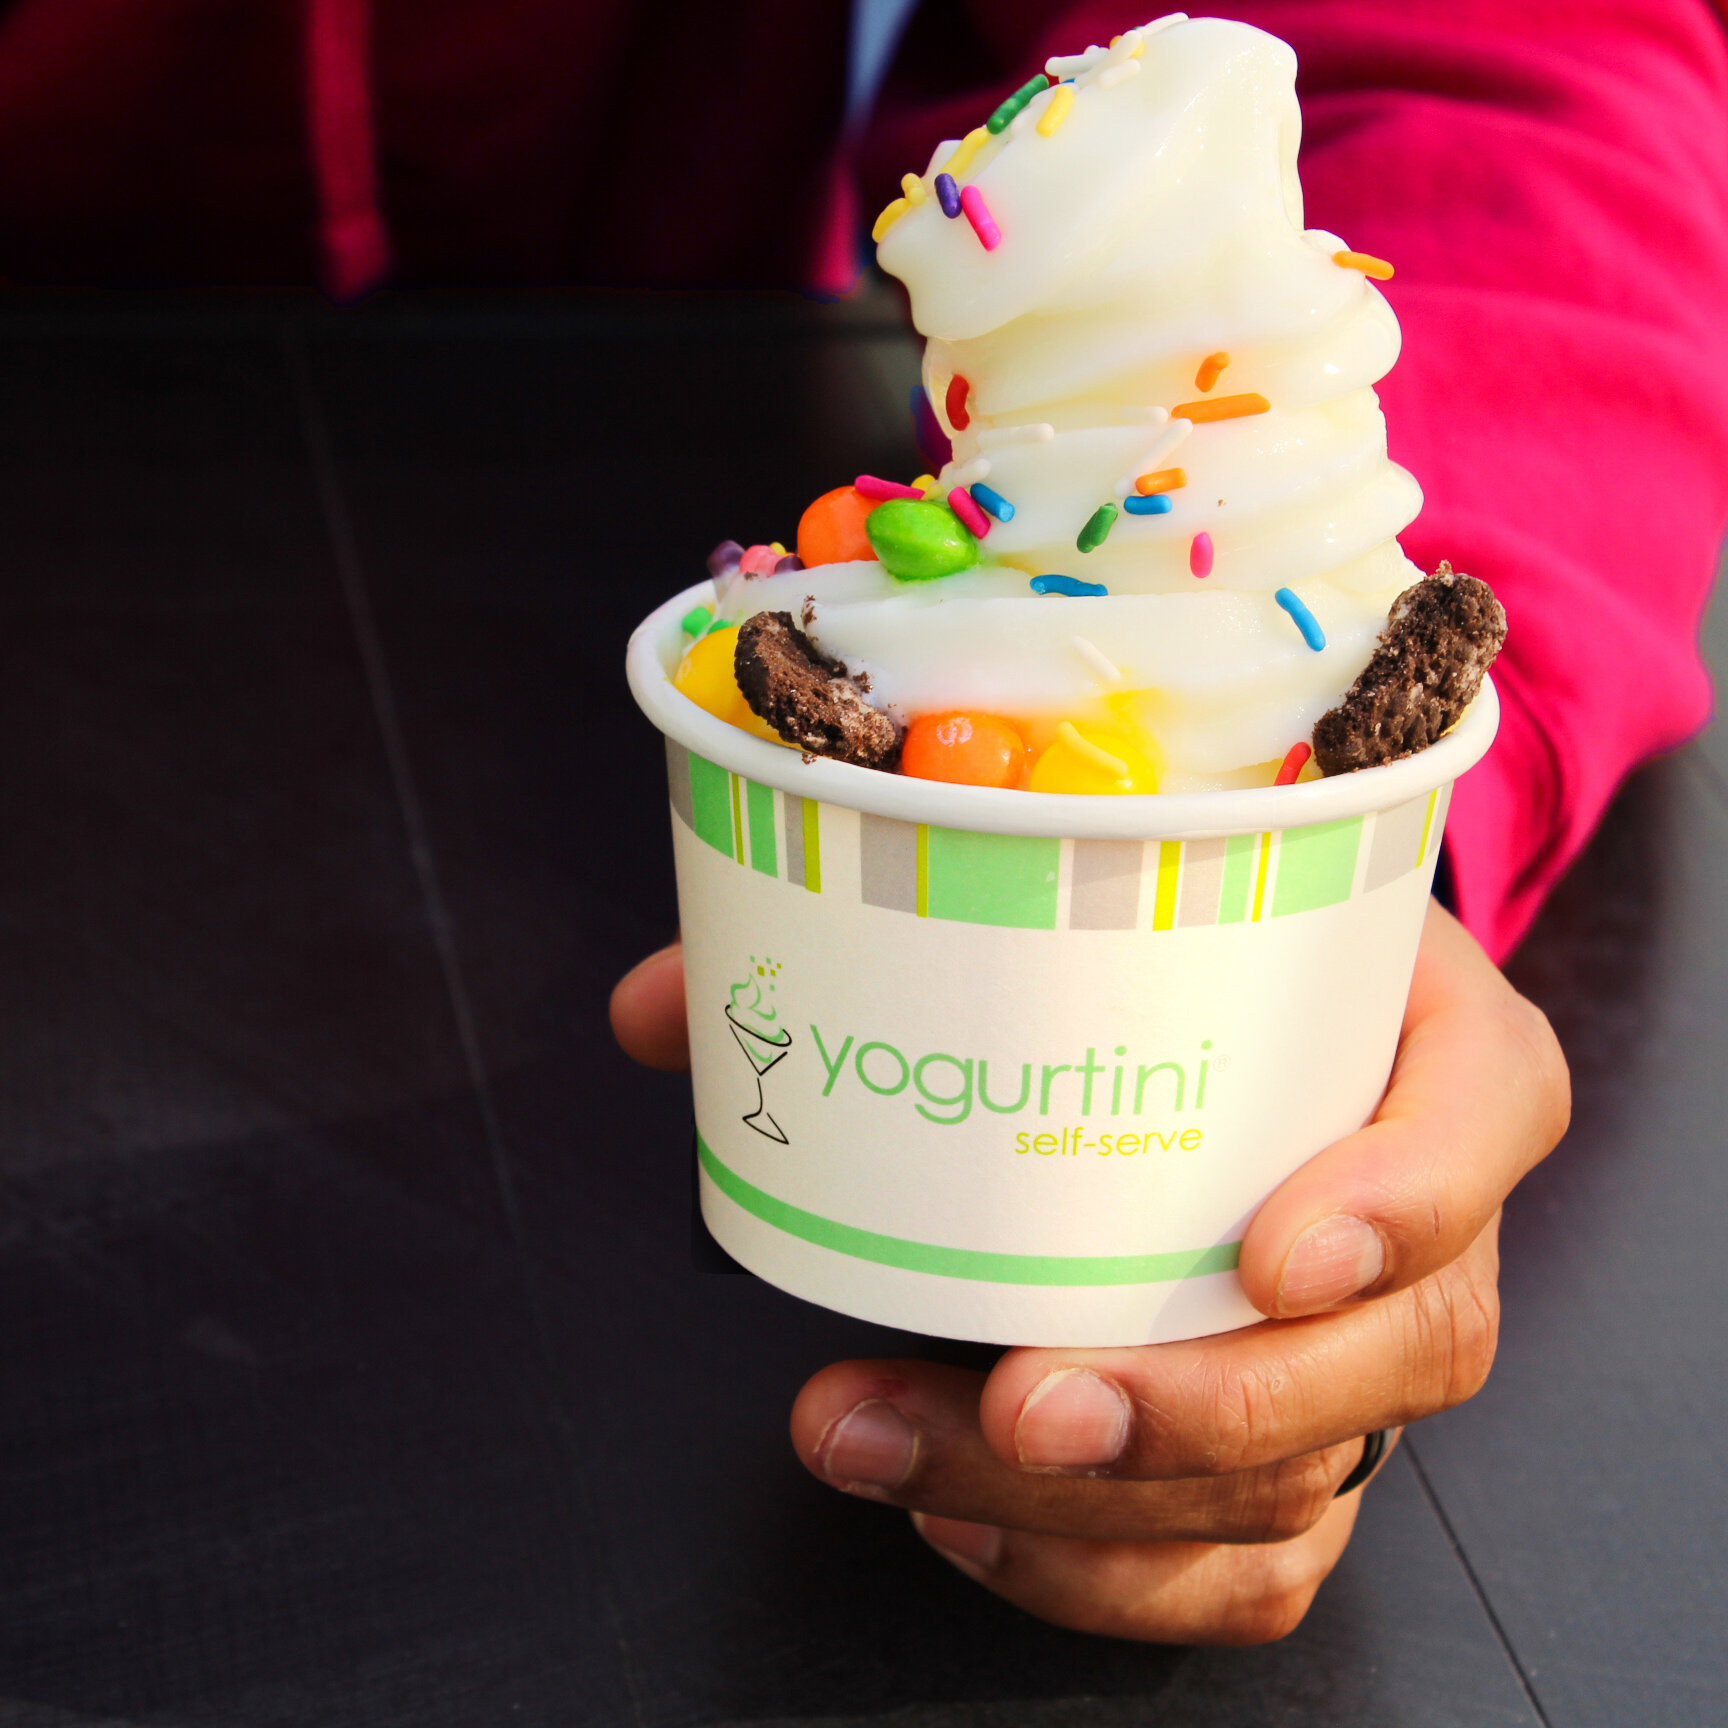 Spring fever? 🌷🌞 The sun is shining and the temps are rising! That's a sign to stop on by for your favorite FroYo.

Whether you're on spring break or counting down the days, it's the perfect week to treat yourself! #kc #kclocal #kansascity #treatyo